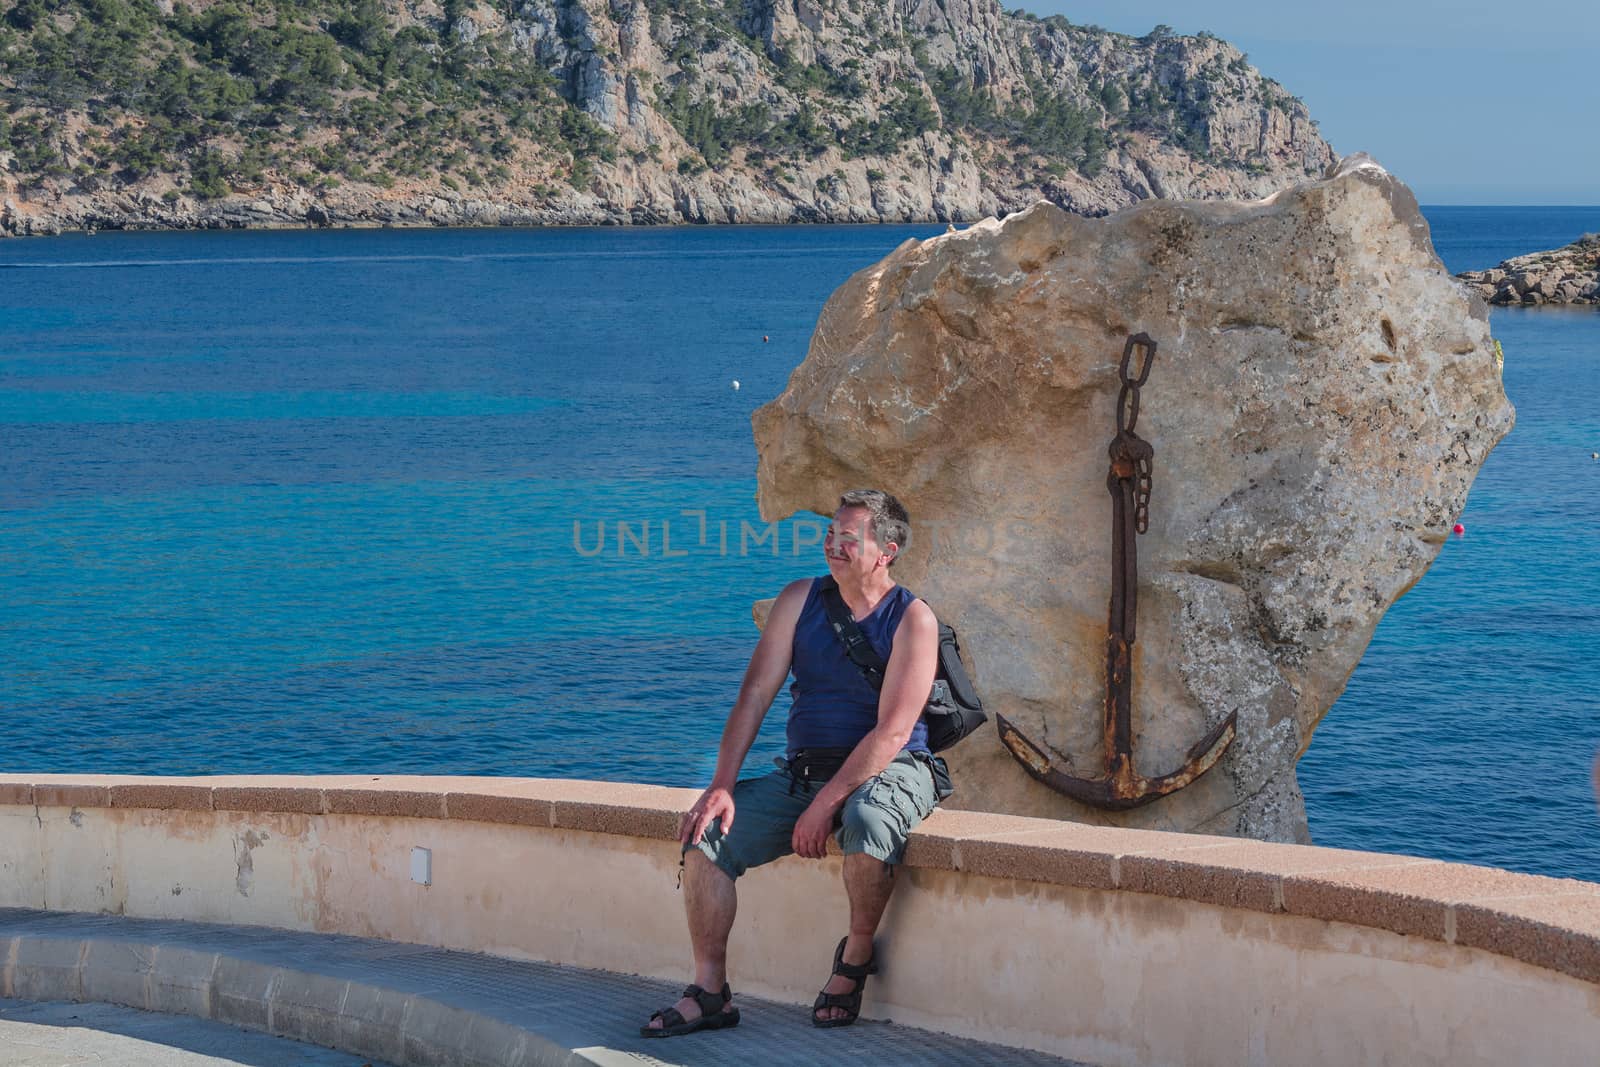 Man sitting on a stone wall facing sideways of the sea and relaxing. Concept of freedom. In the background a rock with a rusty ship anchor. Mallorca, Spain.